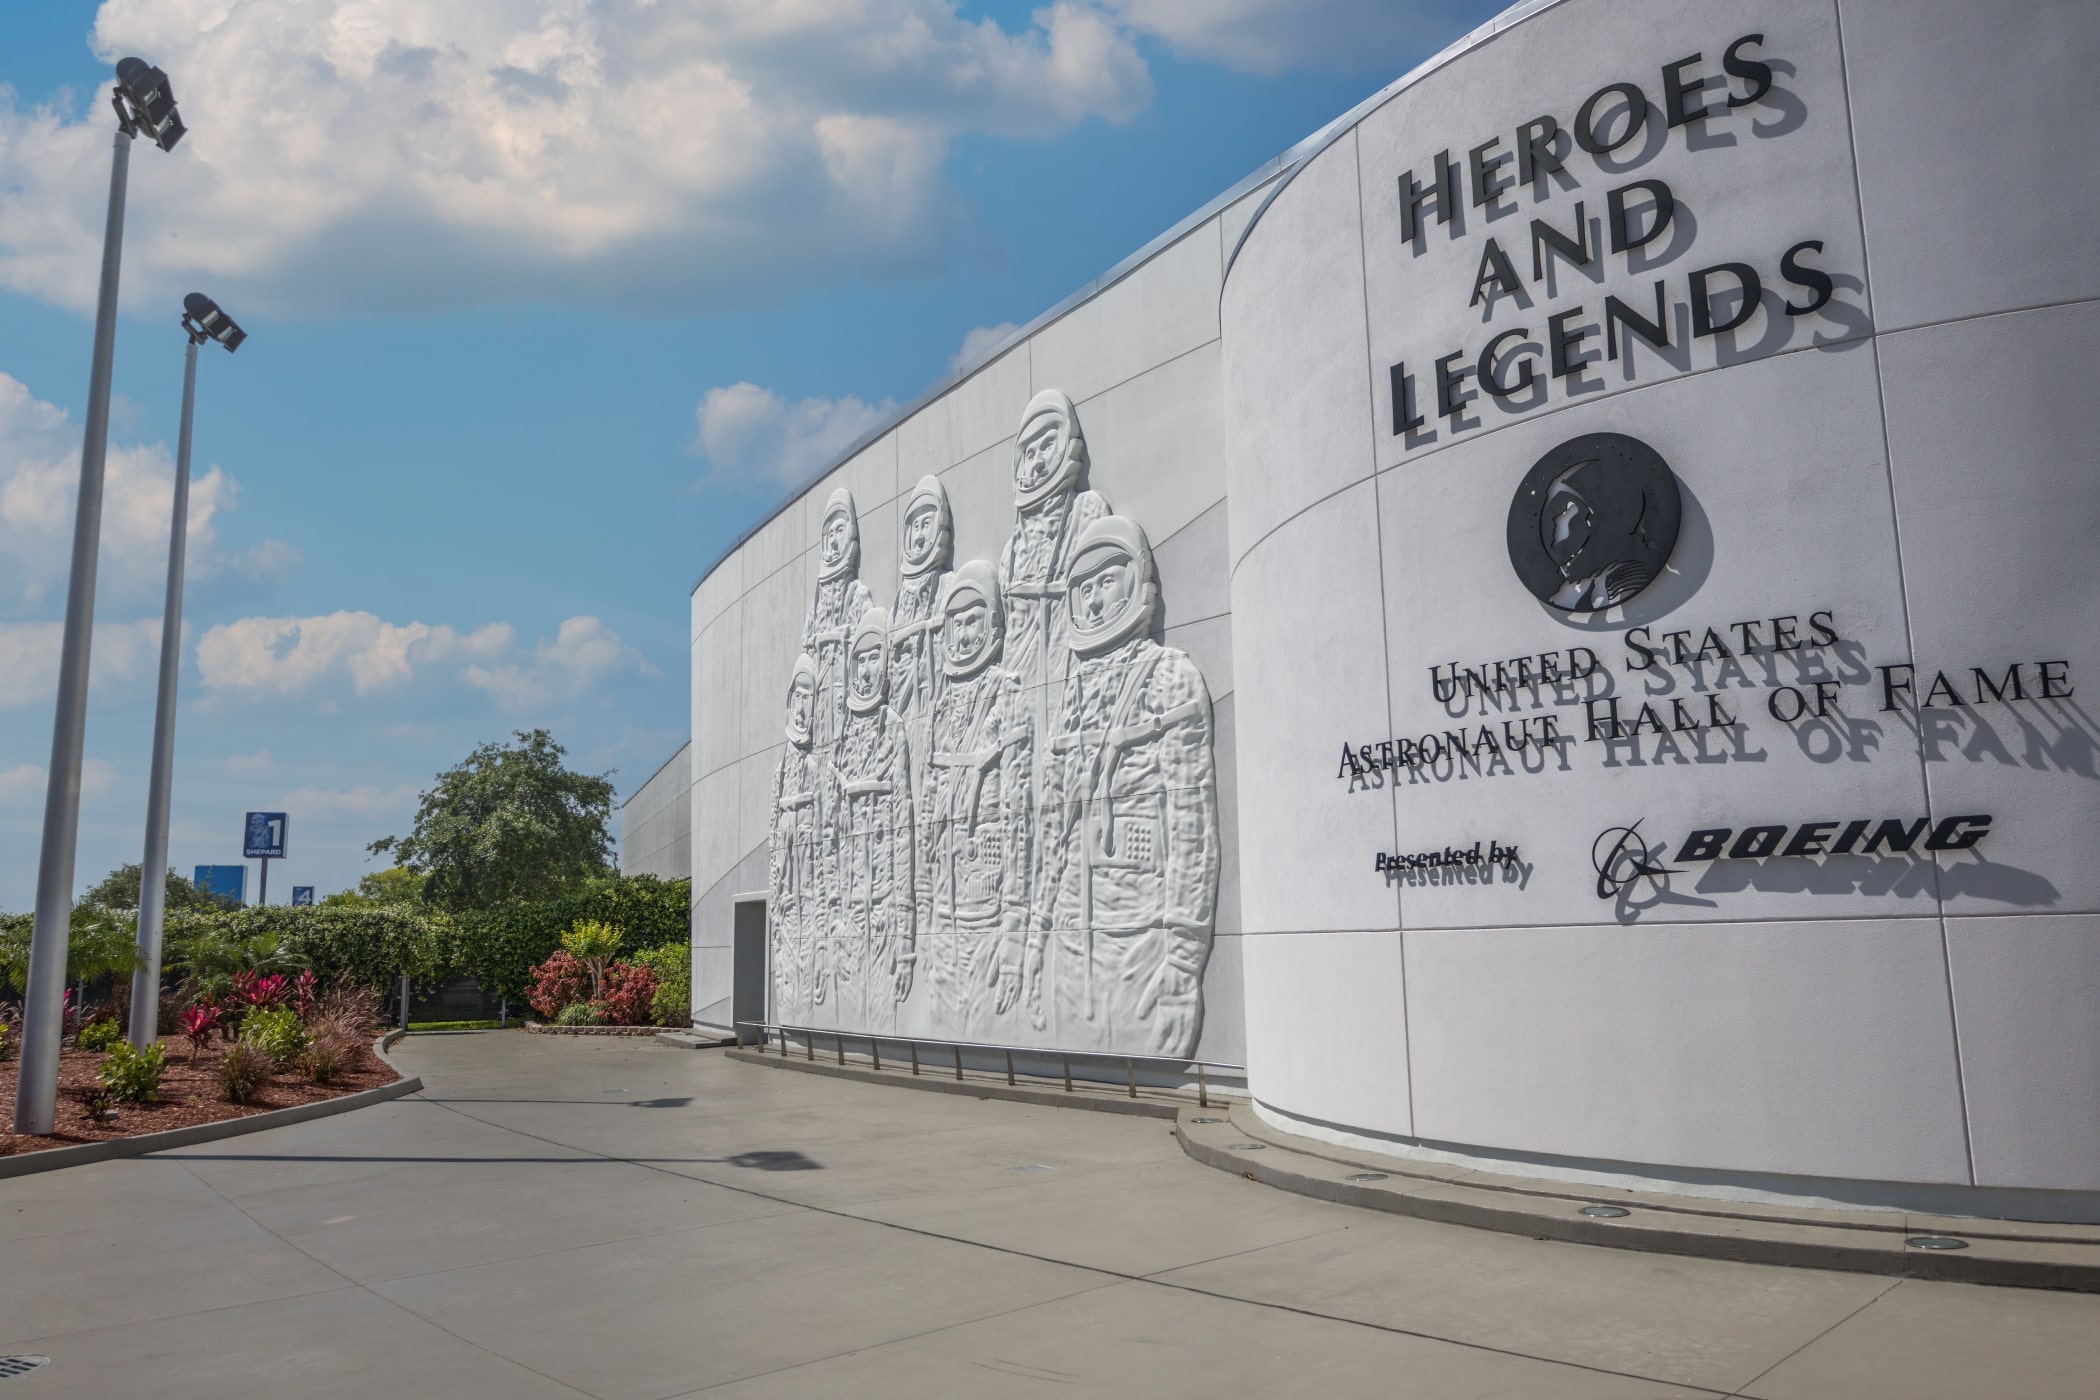 The entrance of Heroes and Legends at Kennedy Space Center in Florida